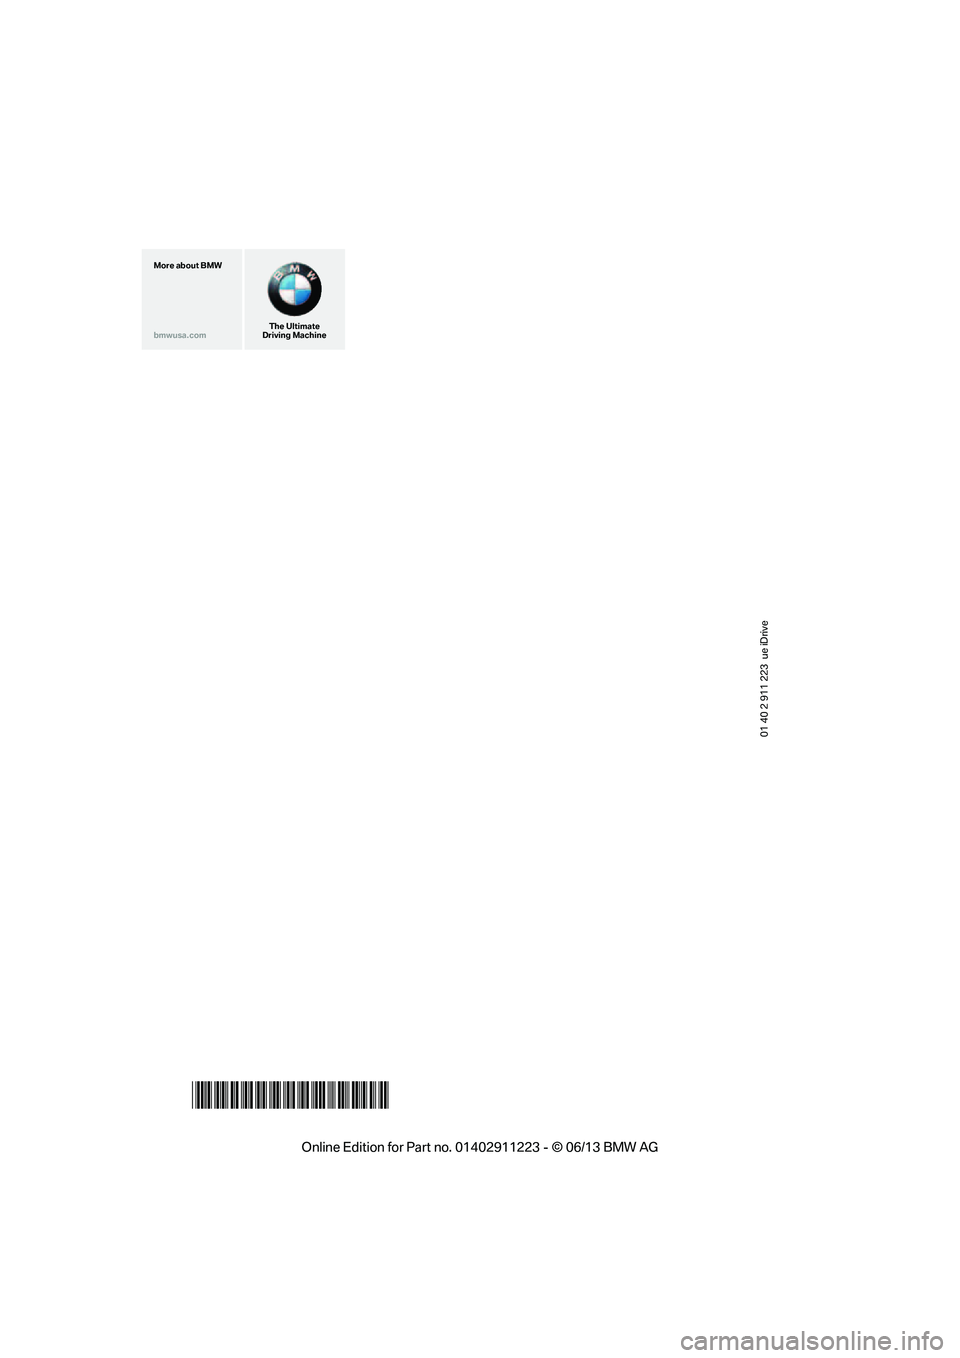 BMW 135IS CONVERTIBLE 2013  Owners Manual 01 40 2 911 223  ue iDrive
*BL291122300I*
The Ultimate
Driving Machine
More about BMW
bmwusa.com

00320051004F004C00510048000300280047004C0057004C005200510003  